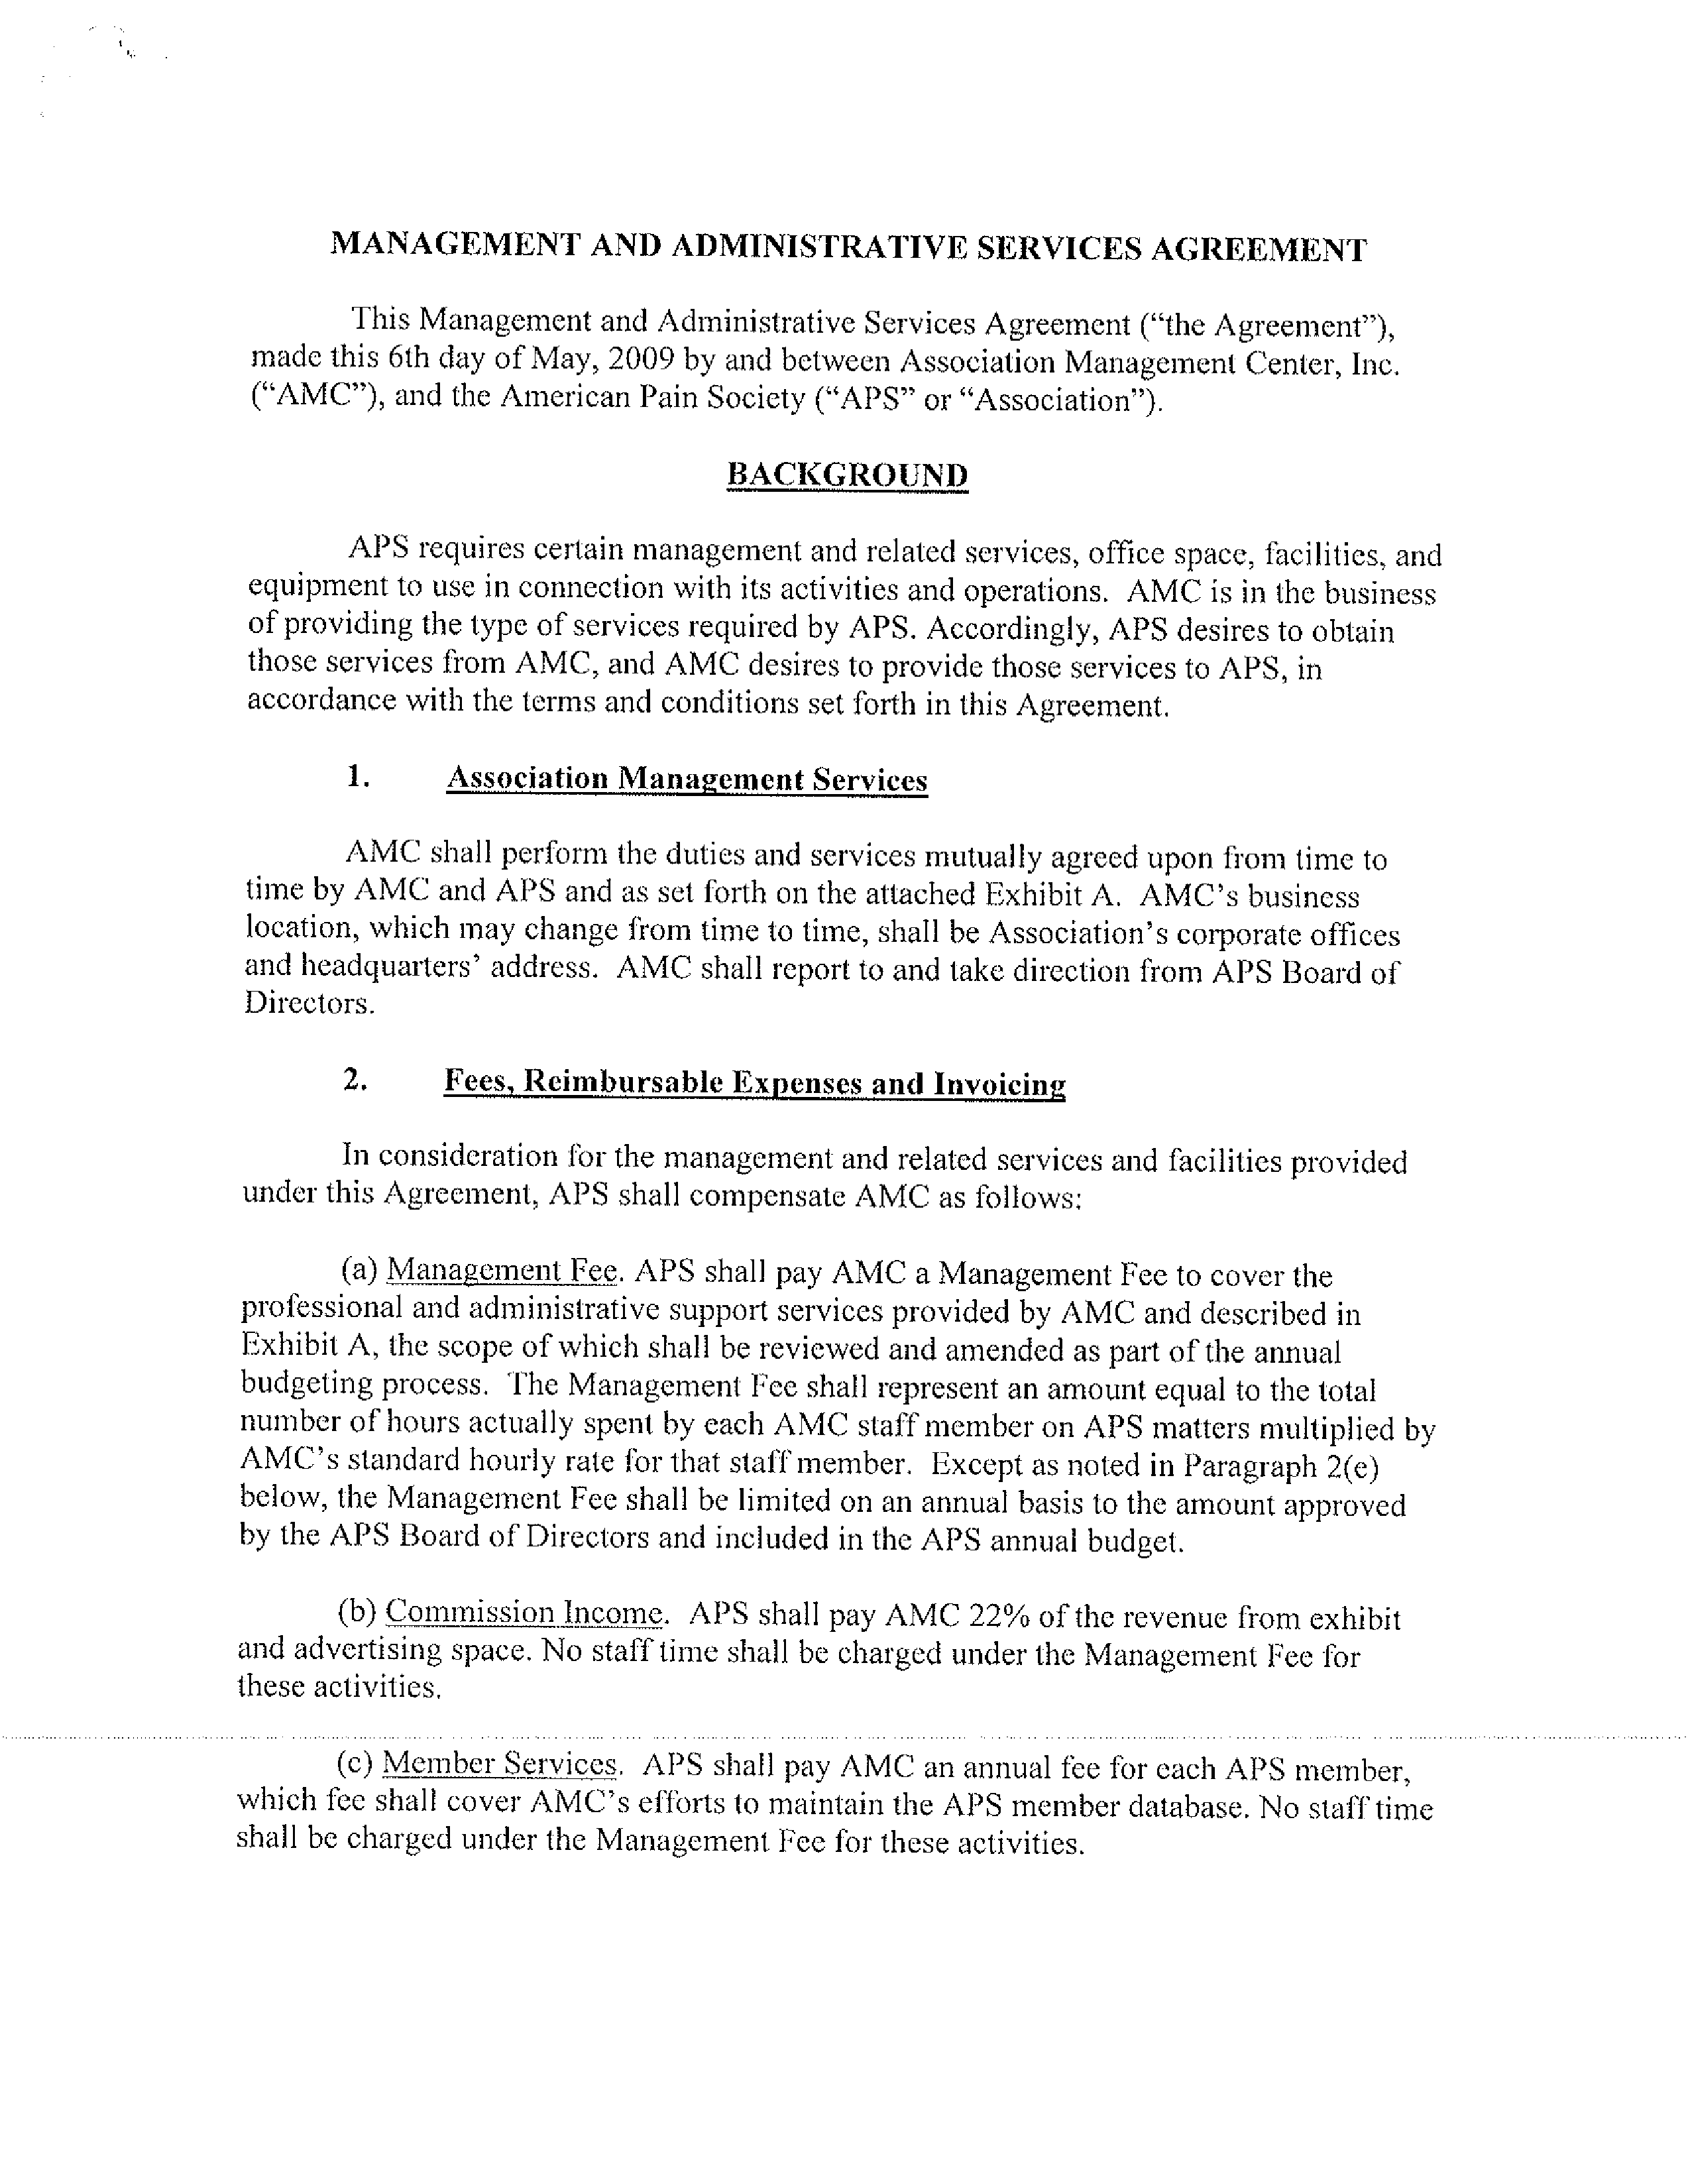 Management Administrative Service Agreement Templates at